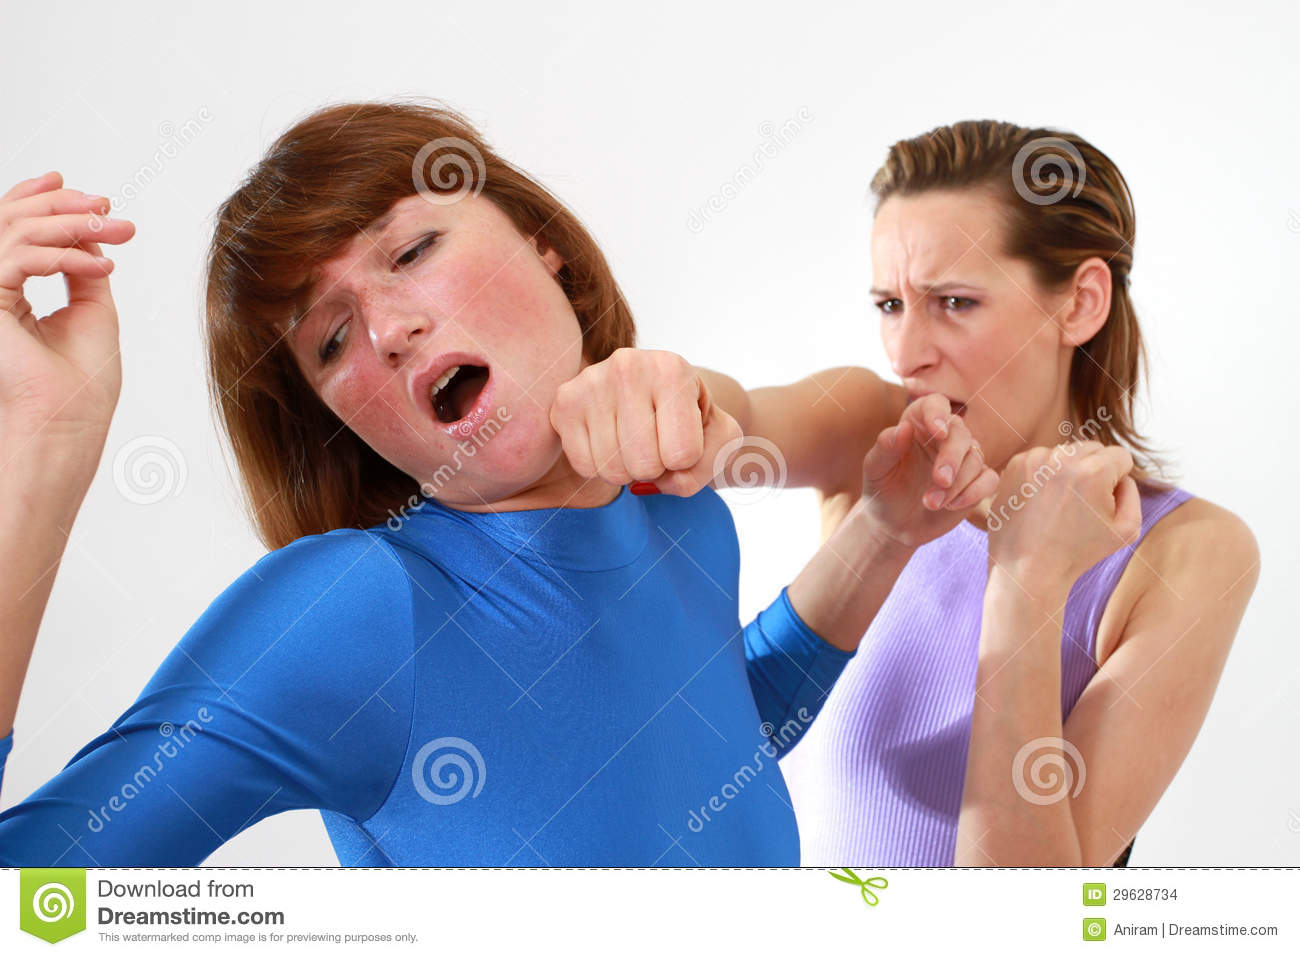 Women Fighting   Face Punch Over White Background 